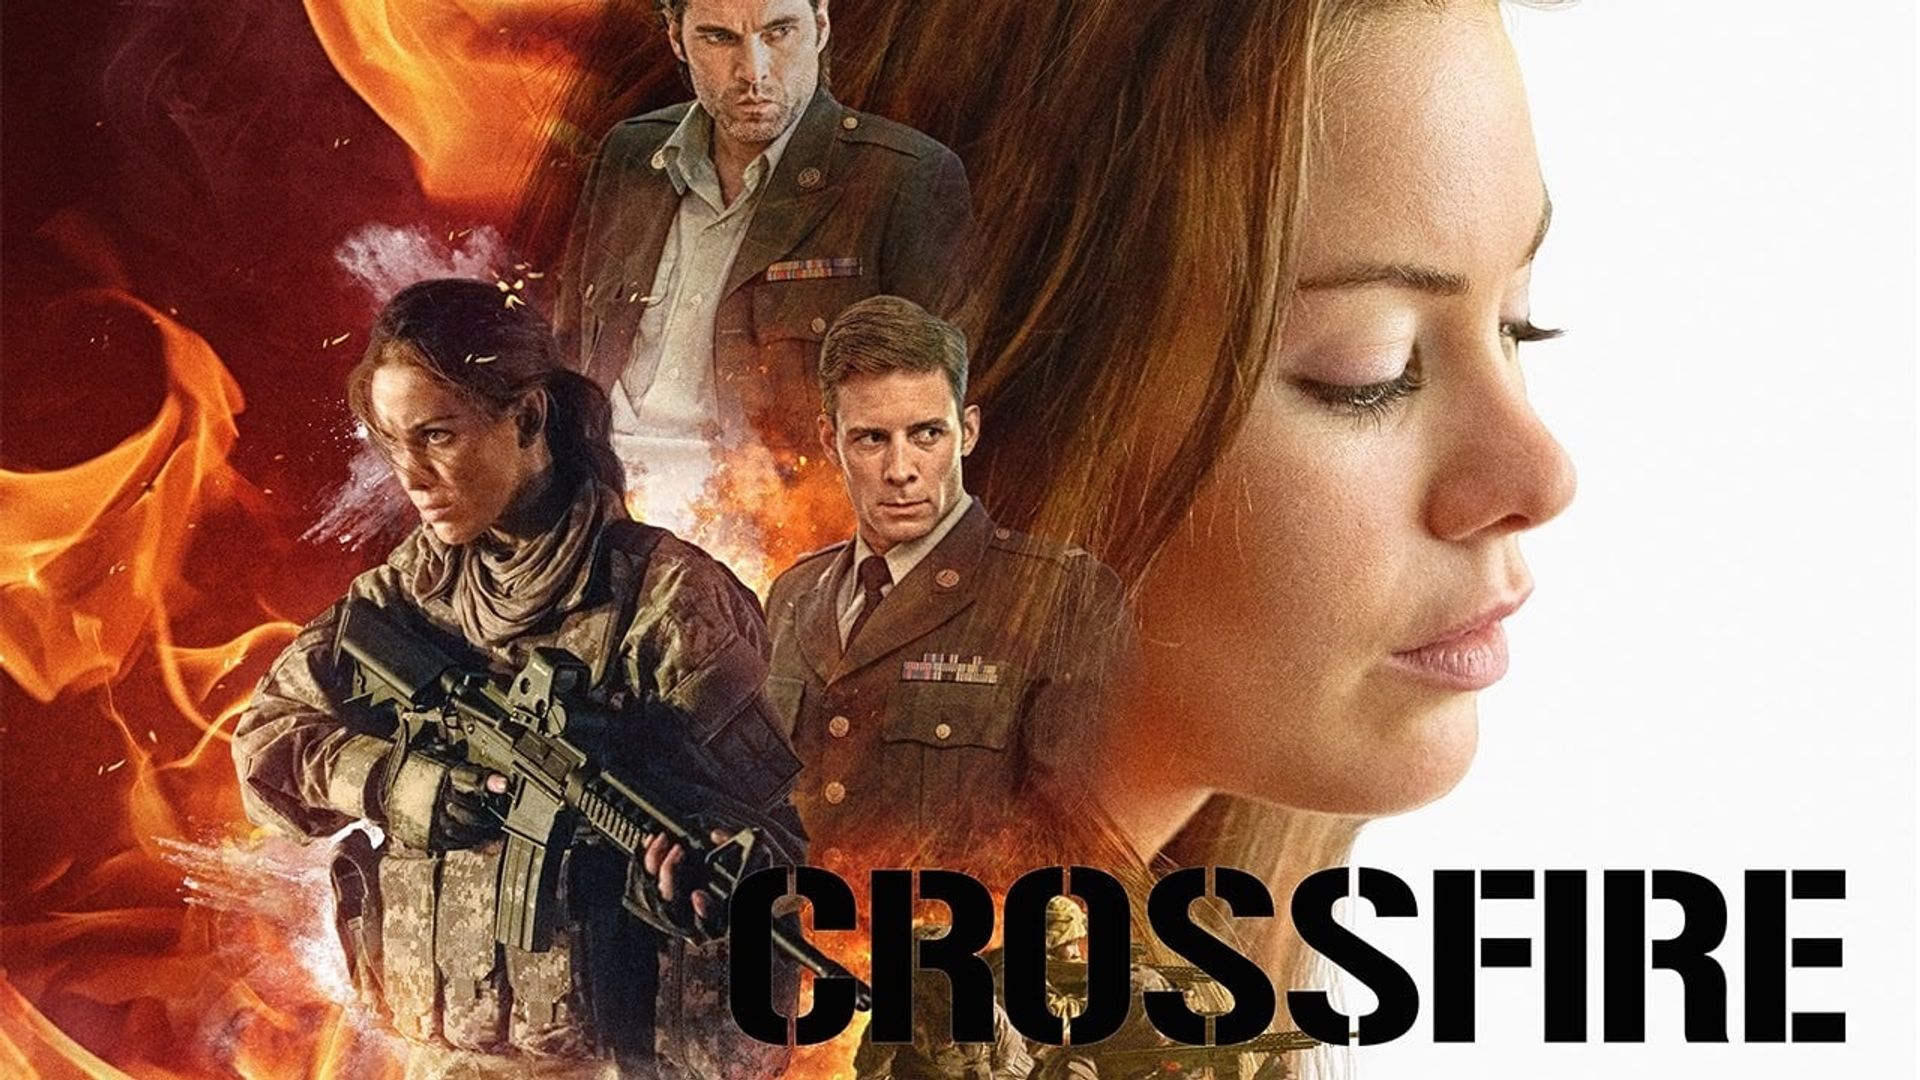 Crossfire background